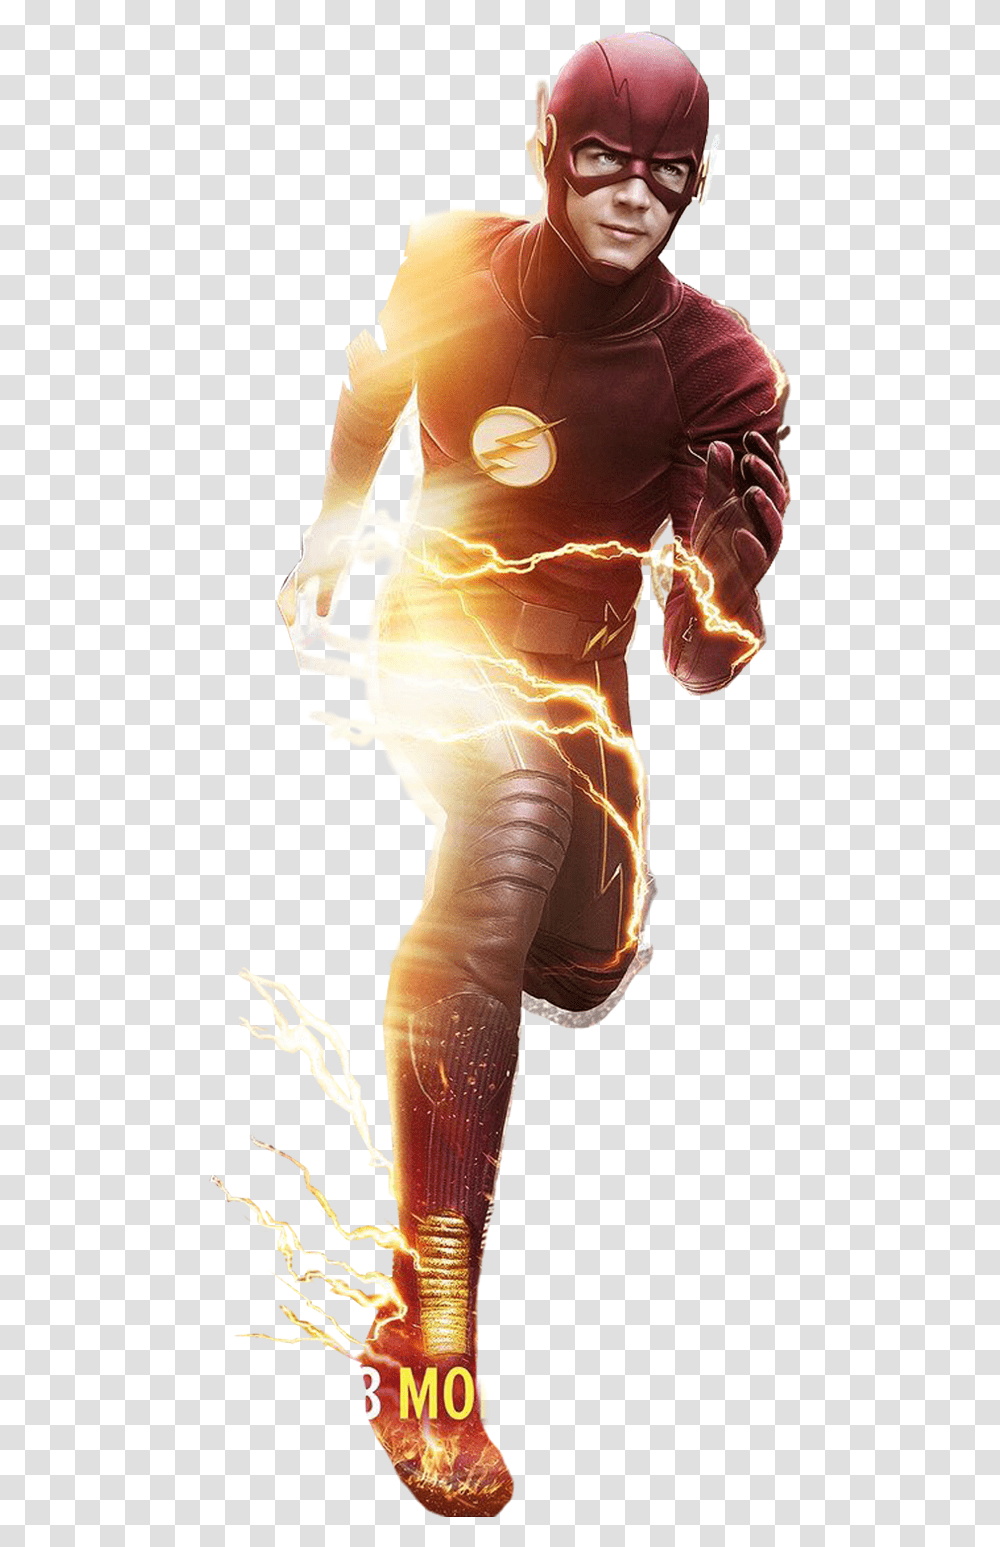 Best Flashlight Supergirl And The Flash, Person, Human, X-Ray, Ct Scan Transparent Png